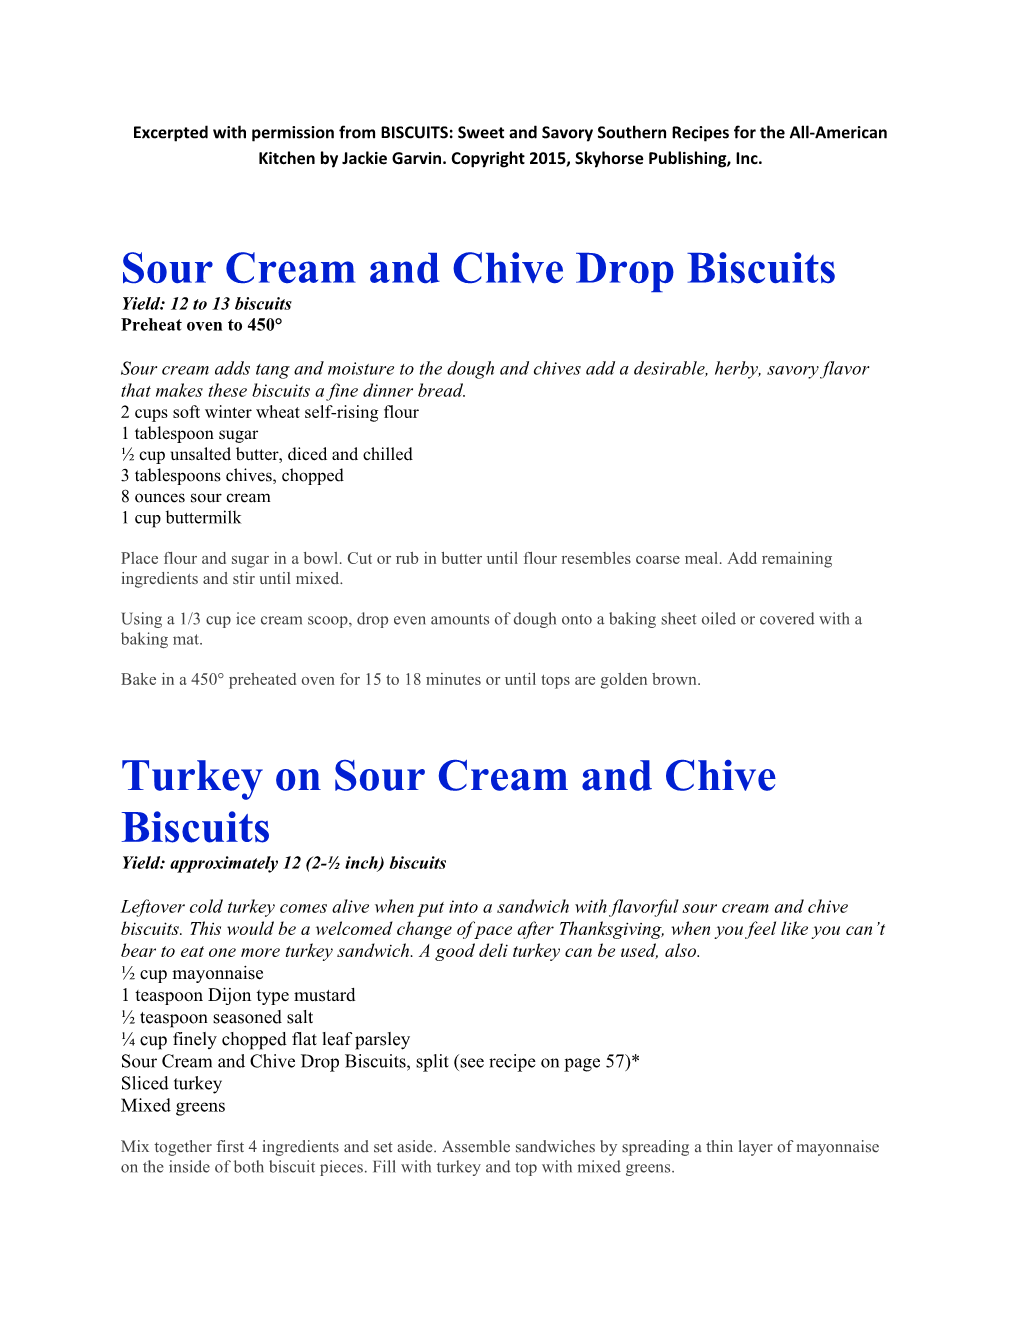 Sour Cream and Chive Drop Biscuits